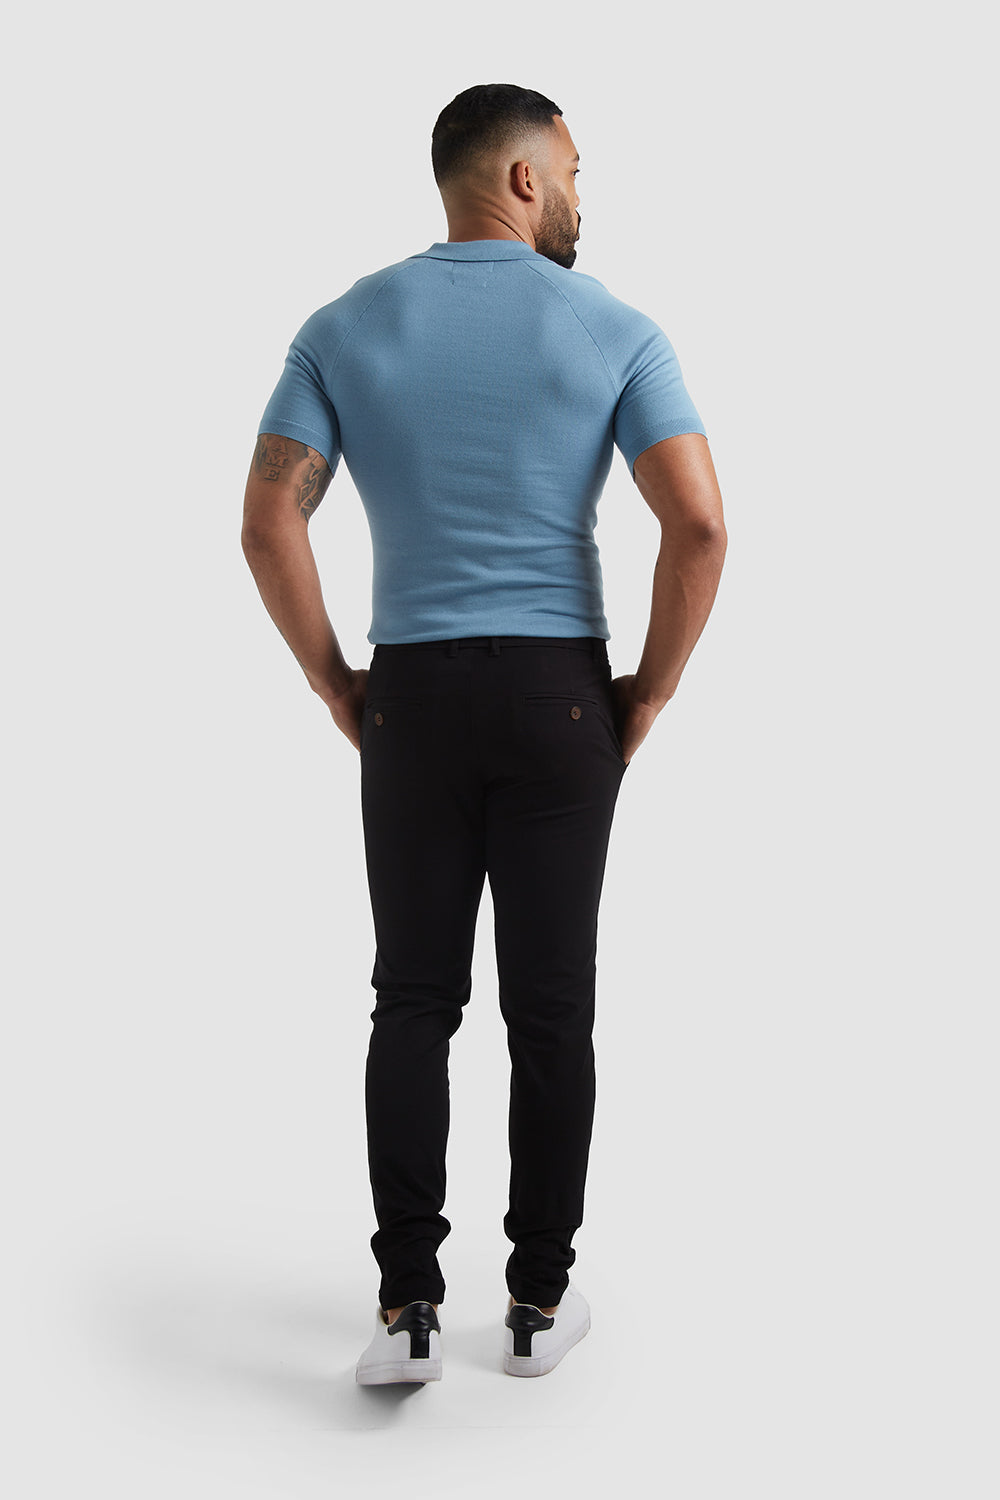 Black TAILORED - ATHLETE Pants USA - in Chino